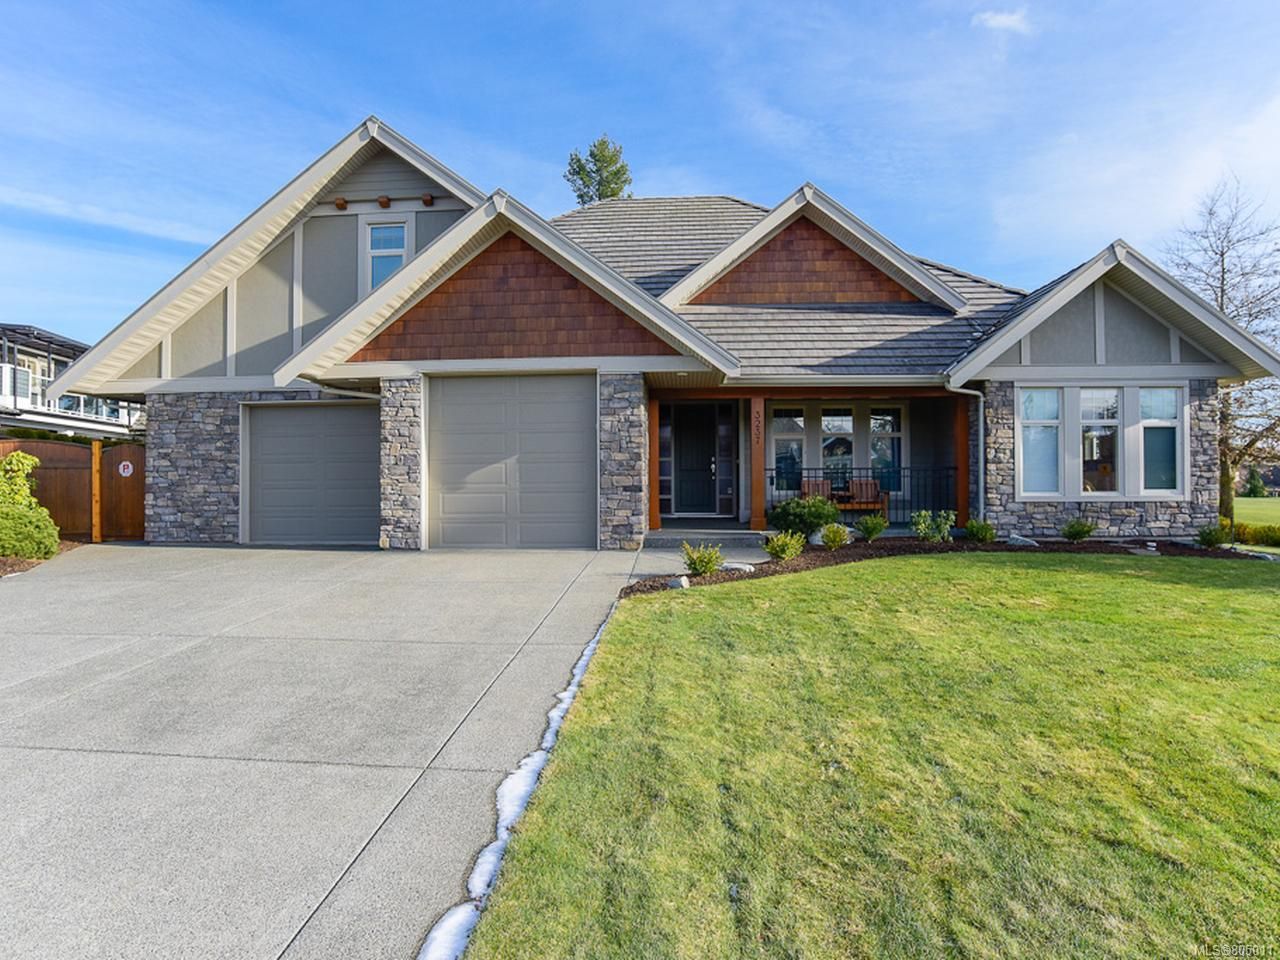 Main Photo: 3237 MAJESTIC DRIVE in COURTENAY: CV Crown Isle House for sale (Comox Valley)  : MLS®# 805011